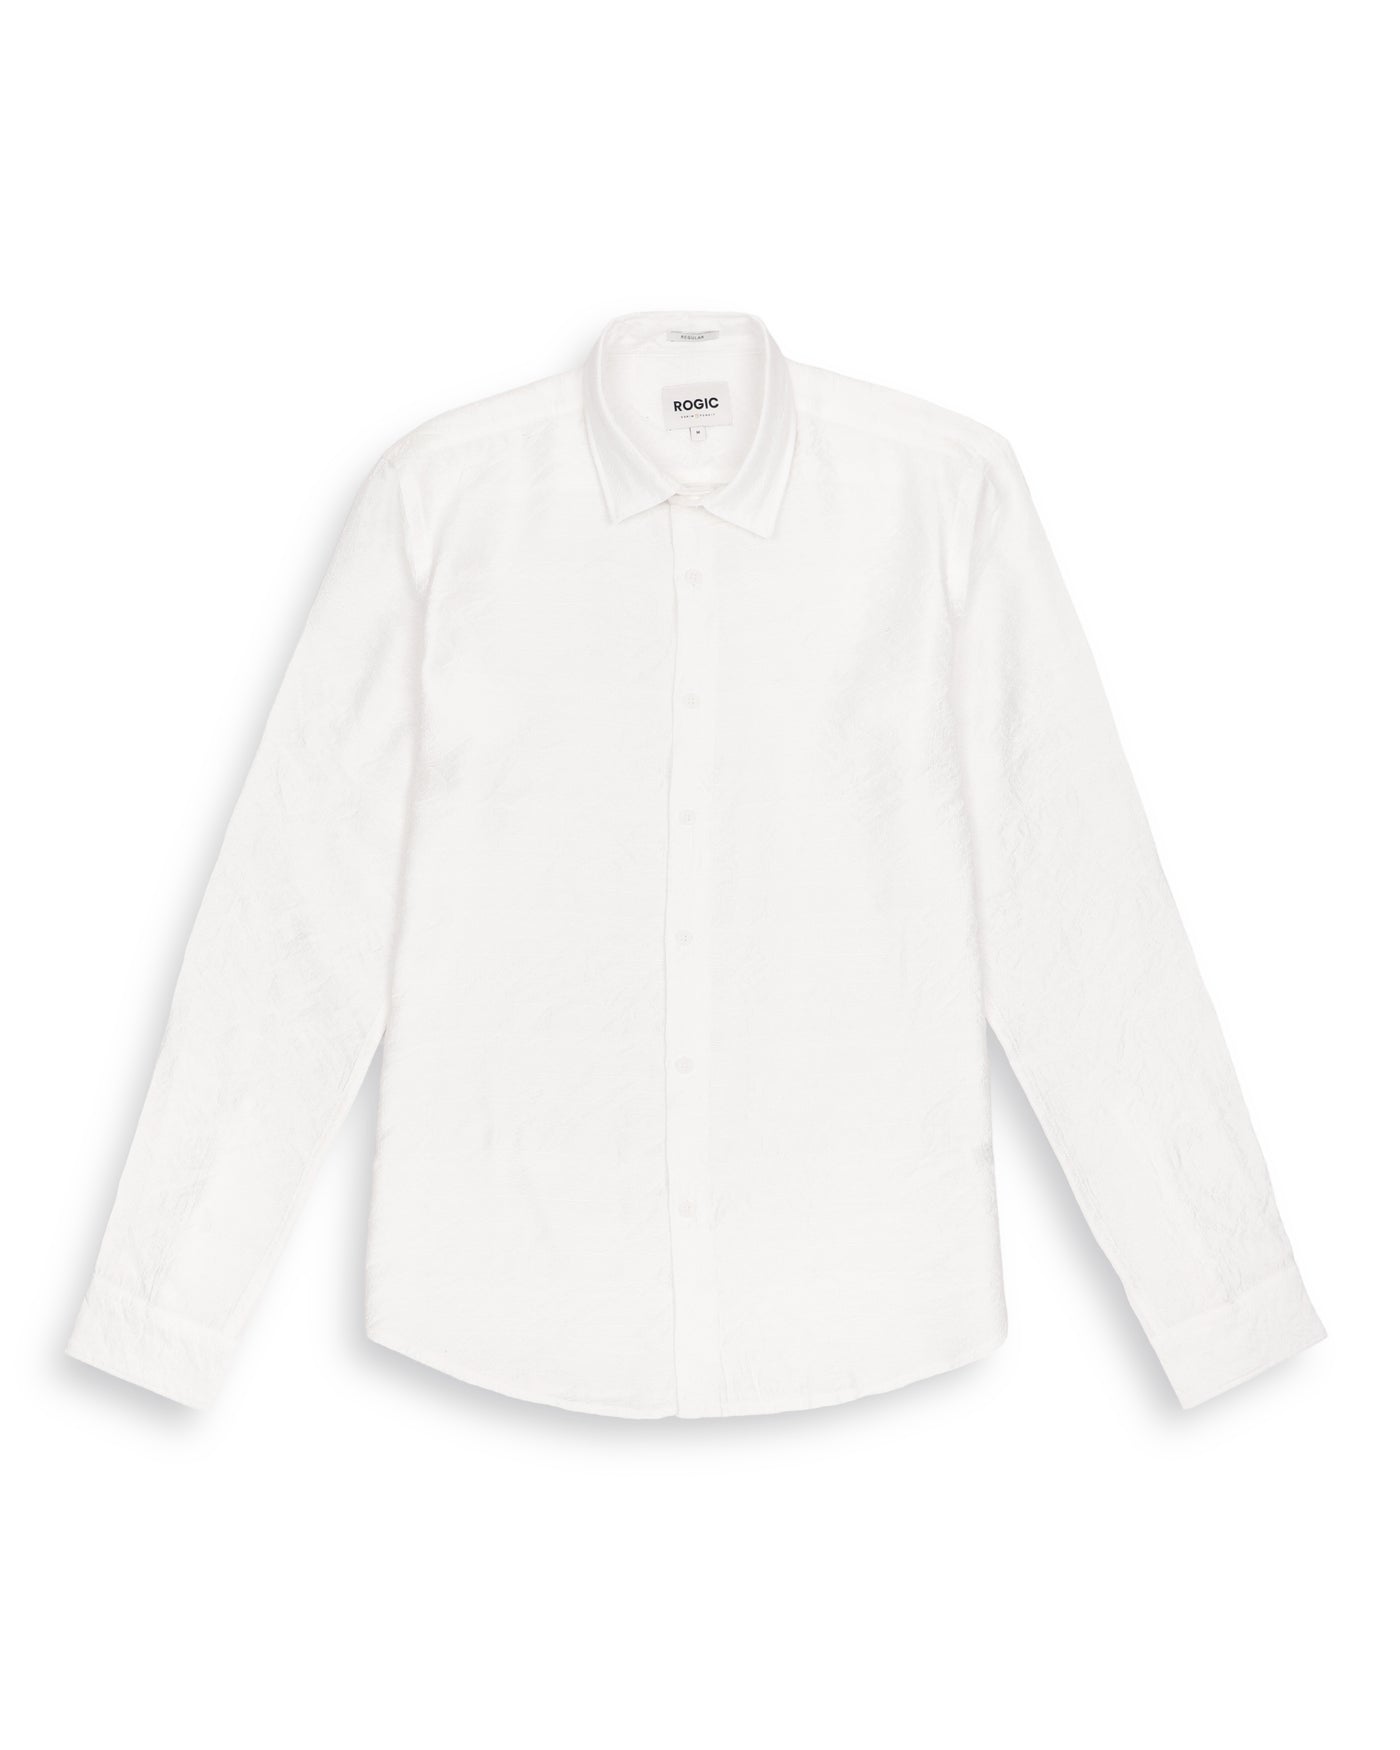 TEXTURE SOLID SHIRT IN WHITE